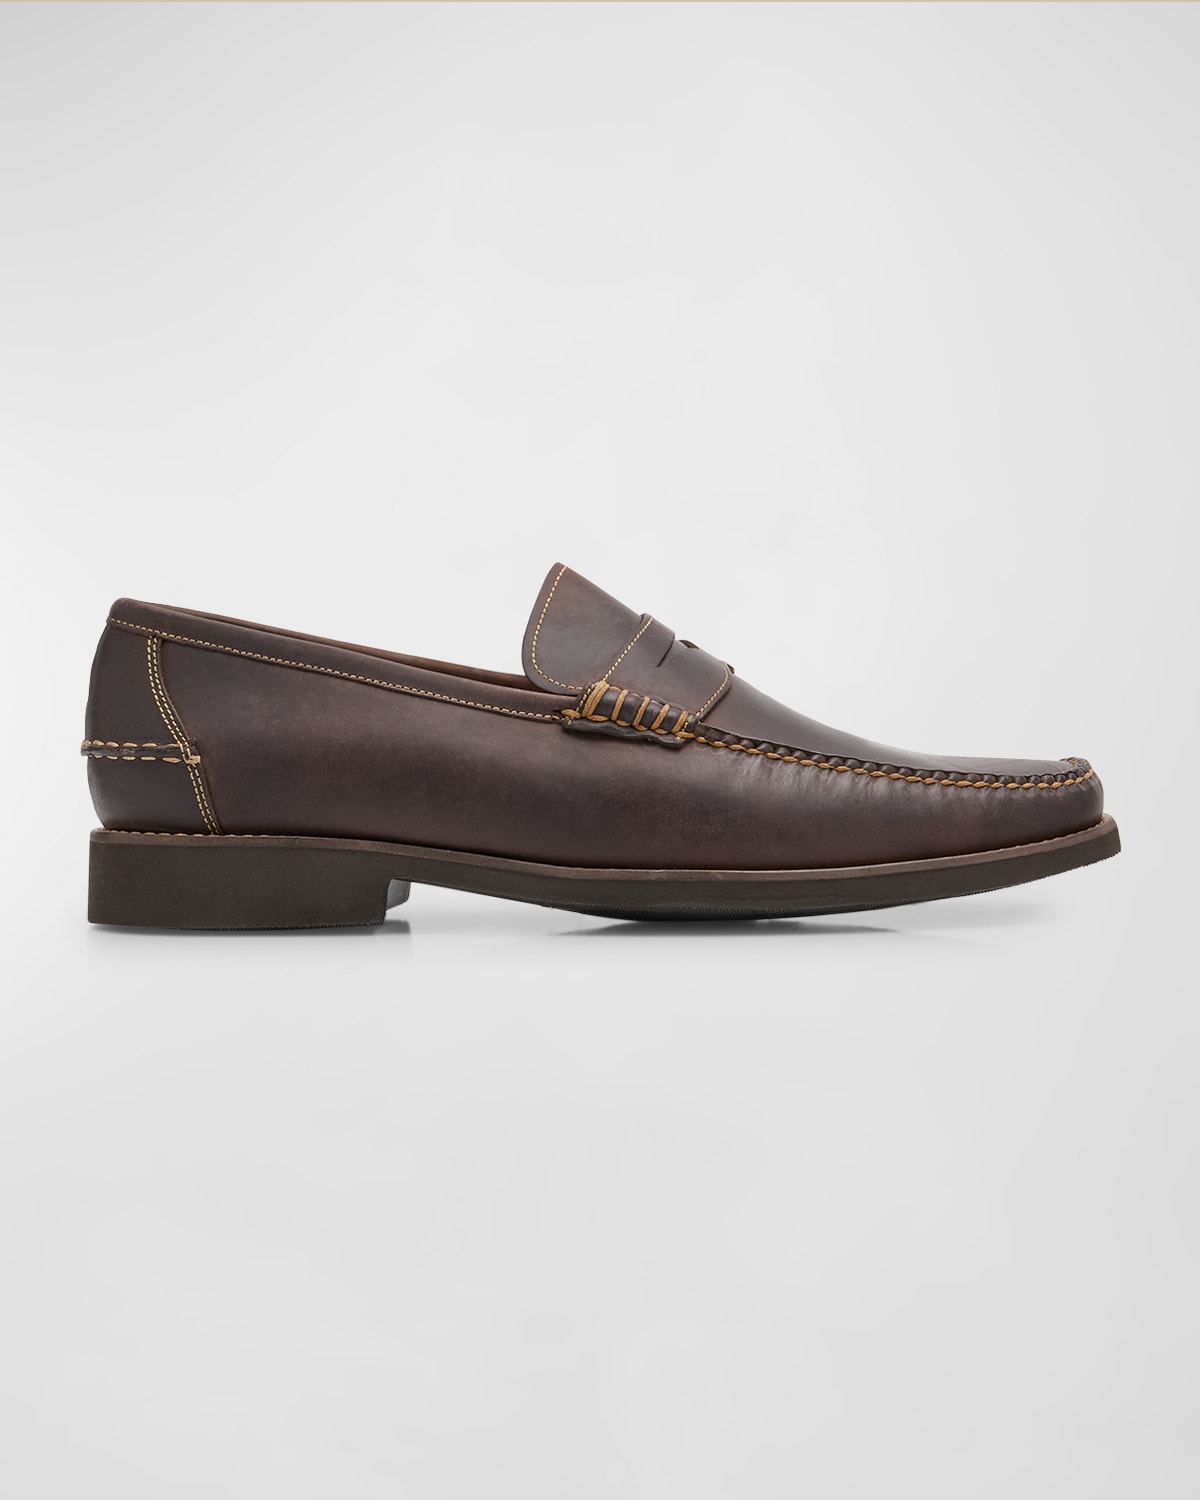 Men's Handsewn Leather Penny Loafers